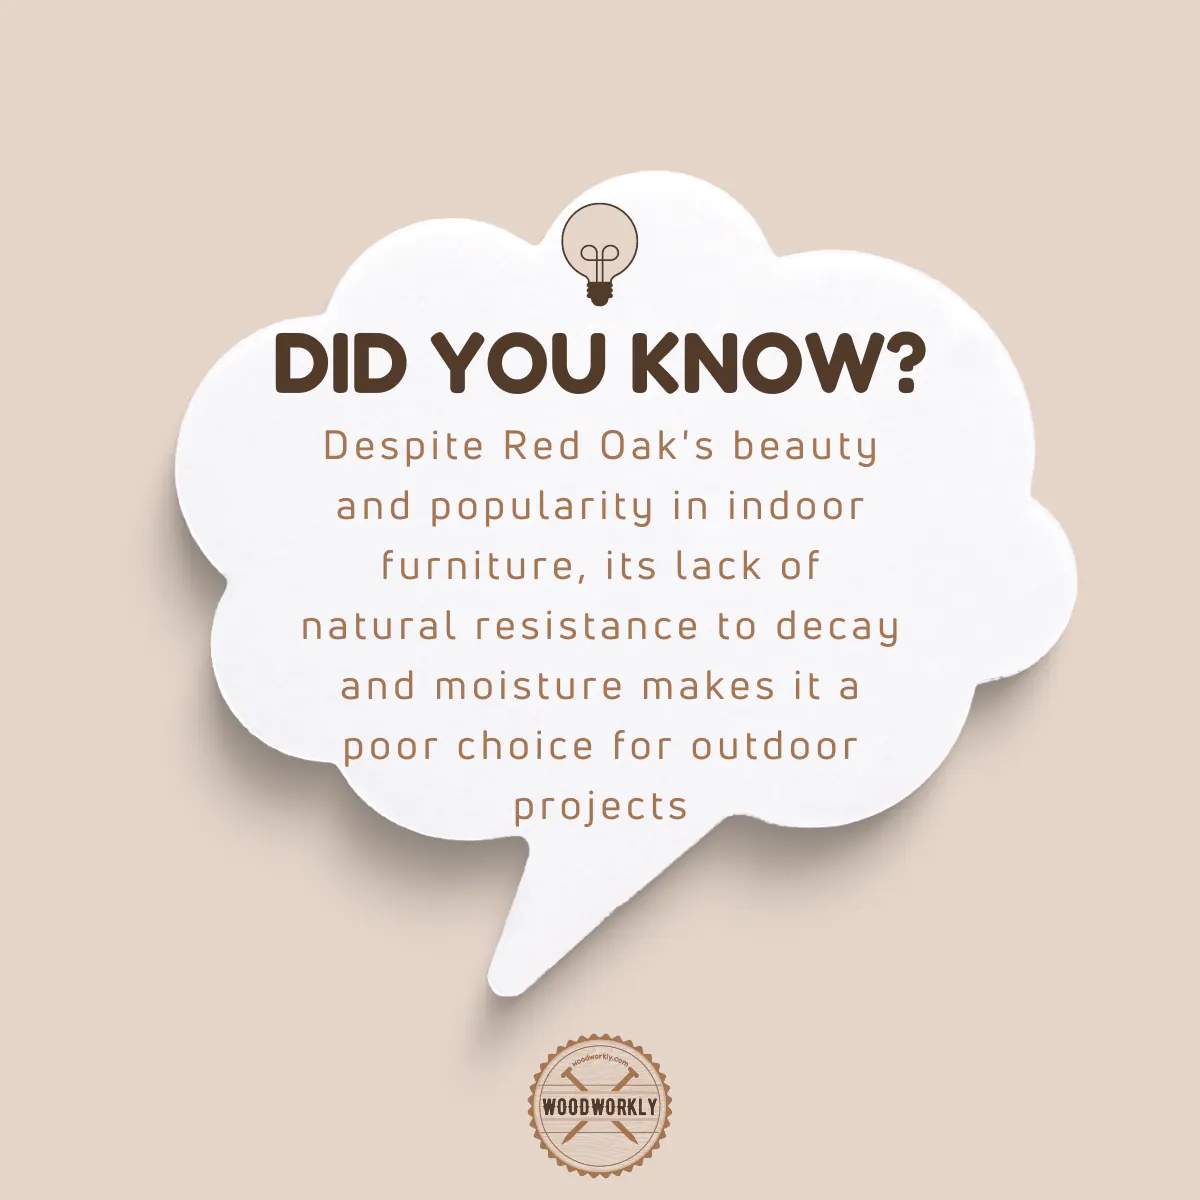 Did you know fact about using Red Oak for outdoor projects